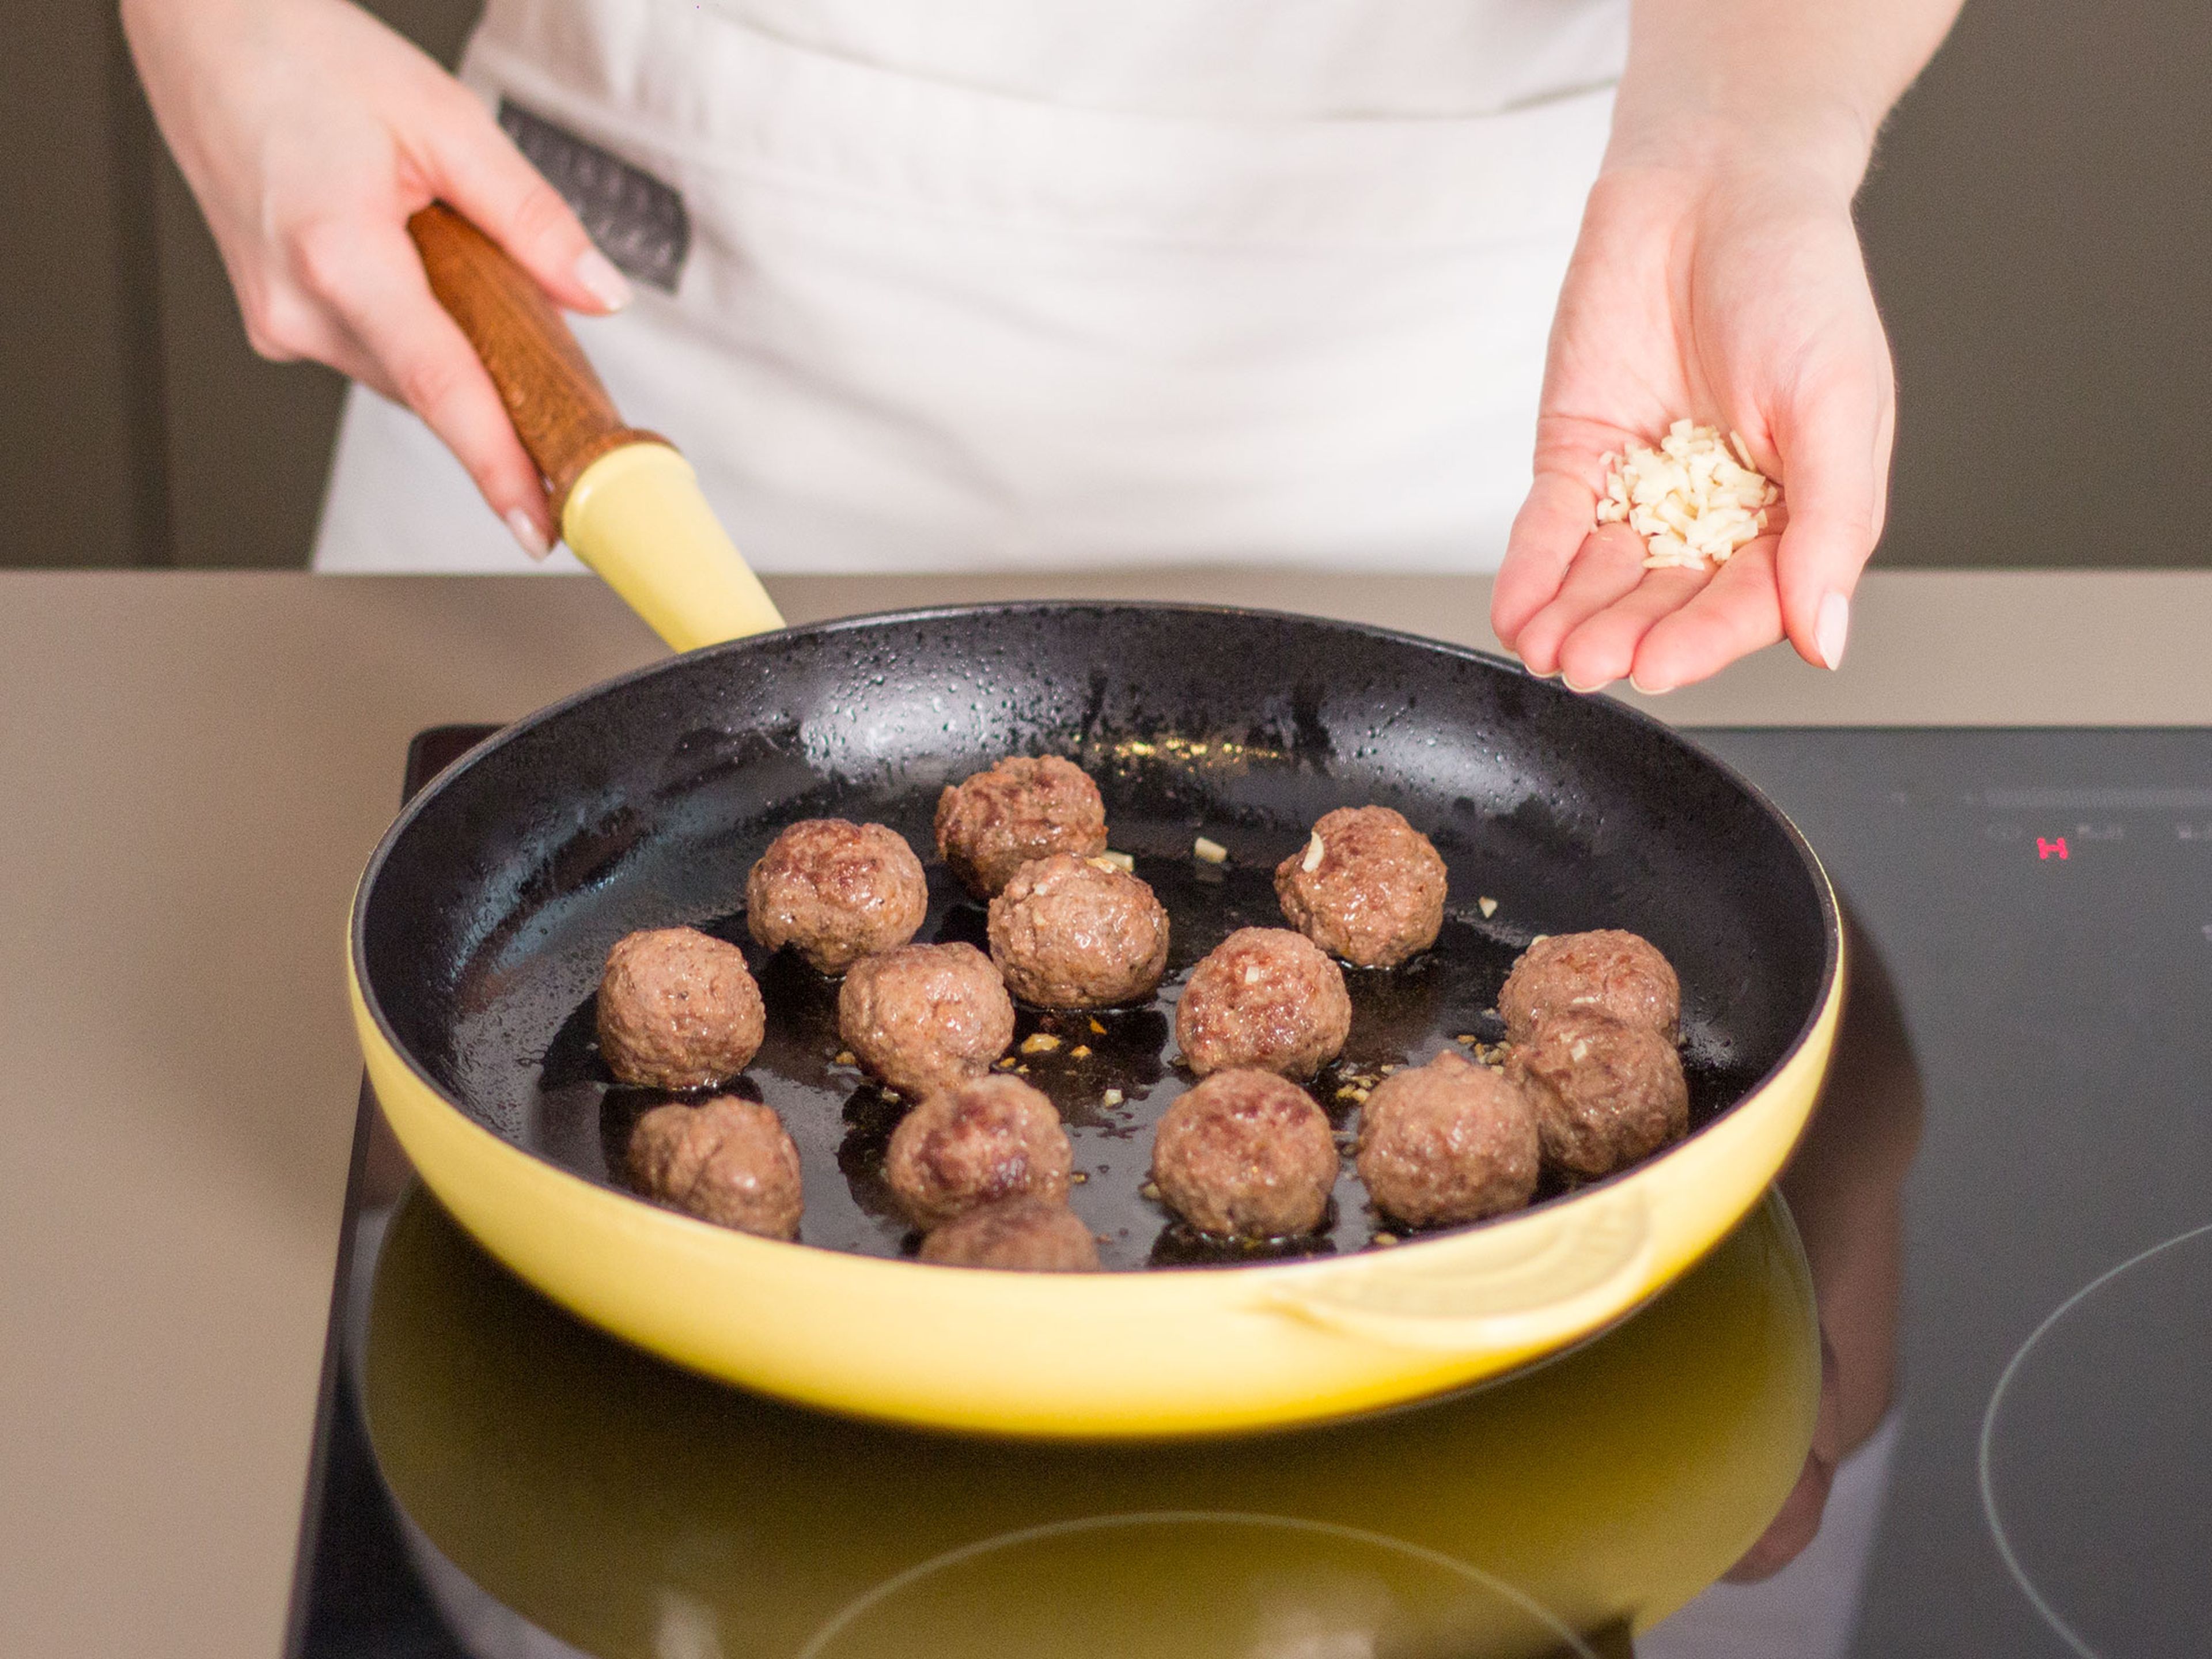 Season ground beef to taste with salt and pepper and form into ping pong-sized meatballs. Heat up some vegetable oil in a large frying pan over medium heat. Add meatballs and cook for approx. 4 – 6 min. until browned. Add garlic once meatballs are nearly cooked through.